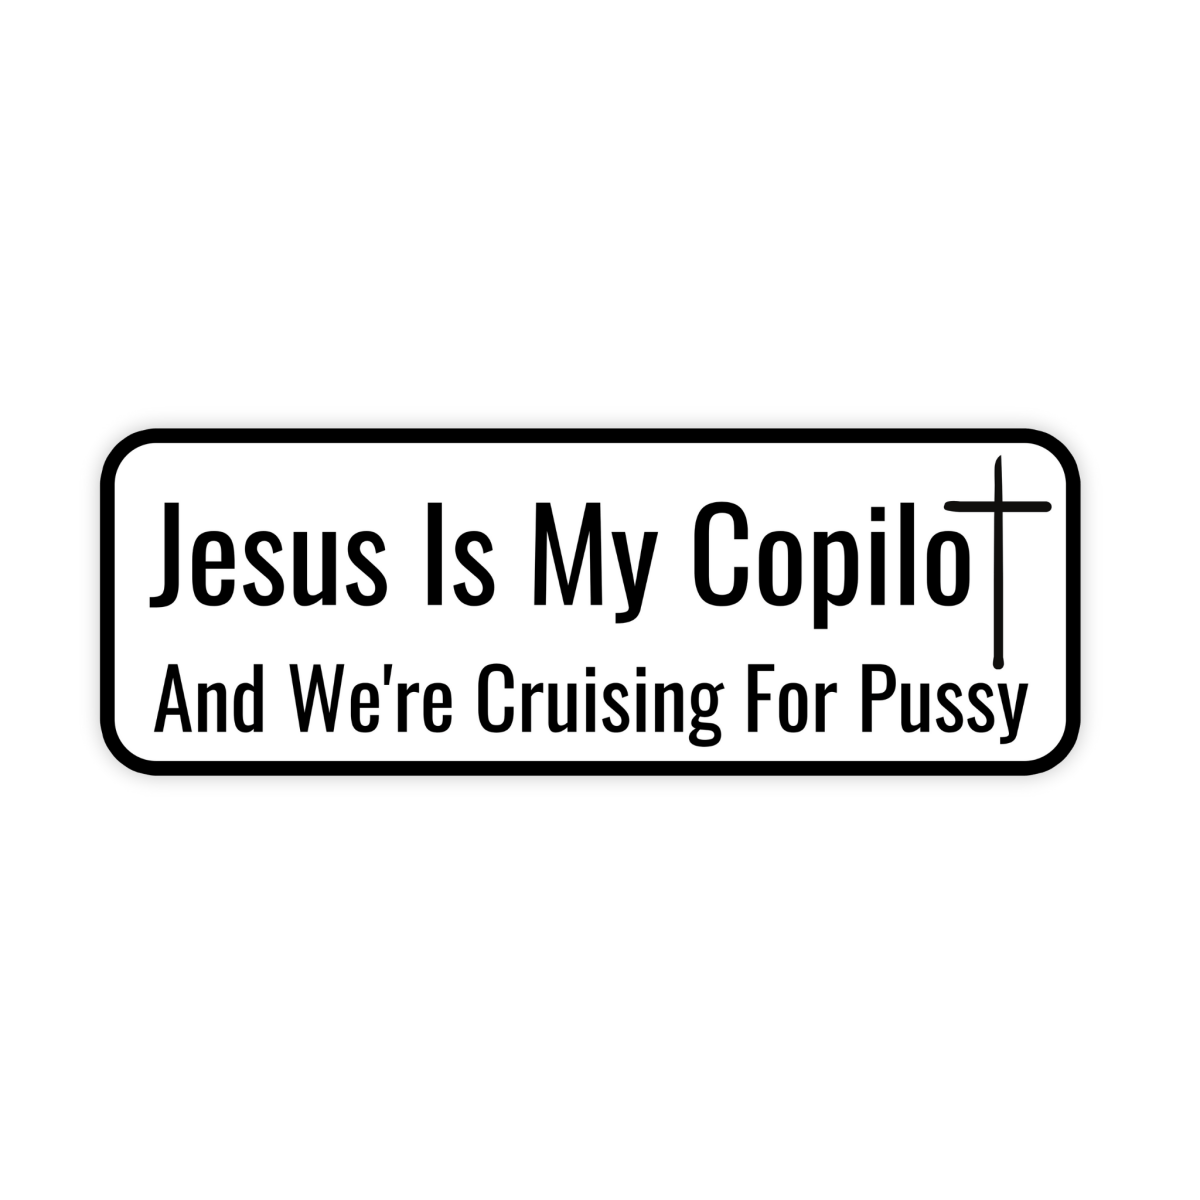 Jesus Is My Copilot And We're Cruising For Pussy Sticker - stickerbullJesus Is My Copilot And We're Cruising For Pussy StickerRetail StickerstickerbullstickerbullSage_Copilot [#146]Jesus Is My Copilot And We're Cruising For Pussy Sticker